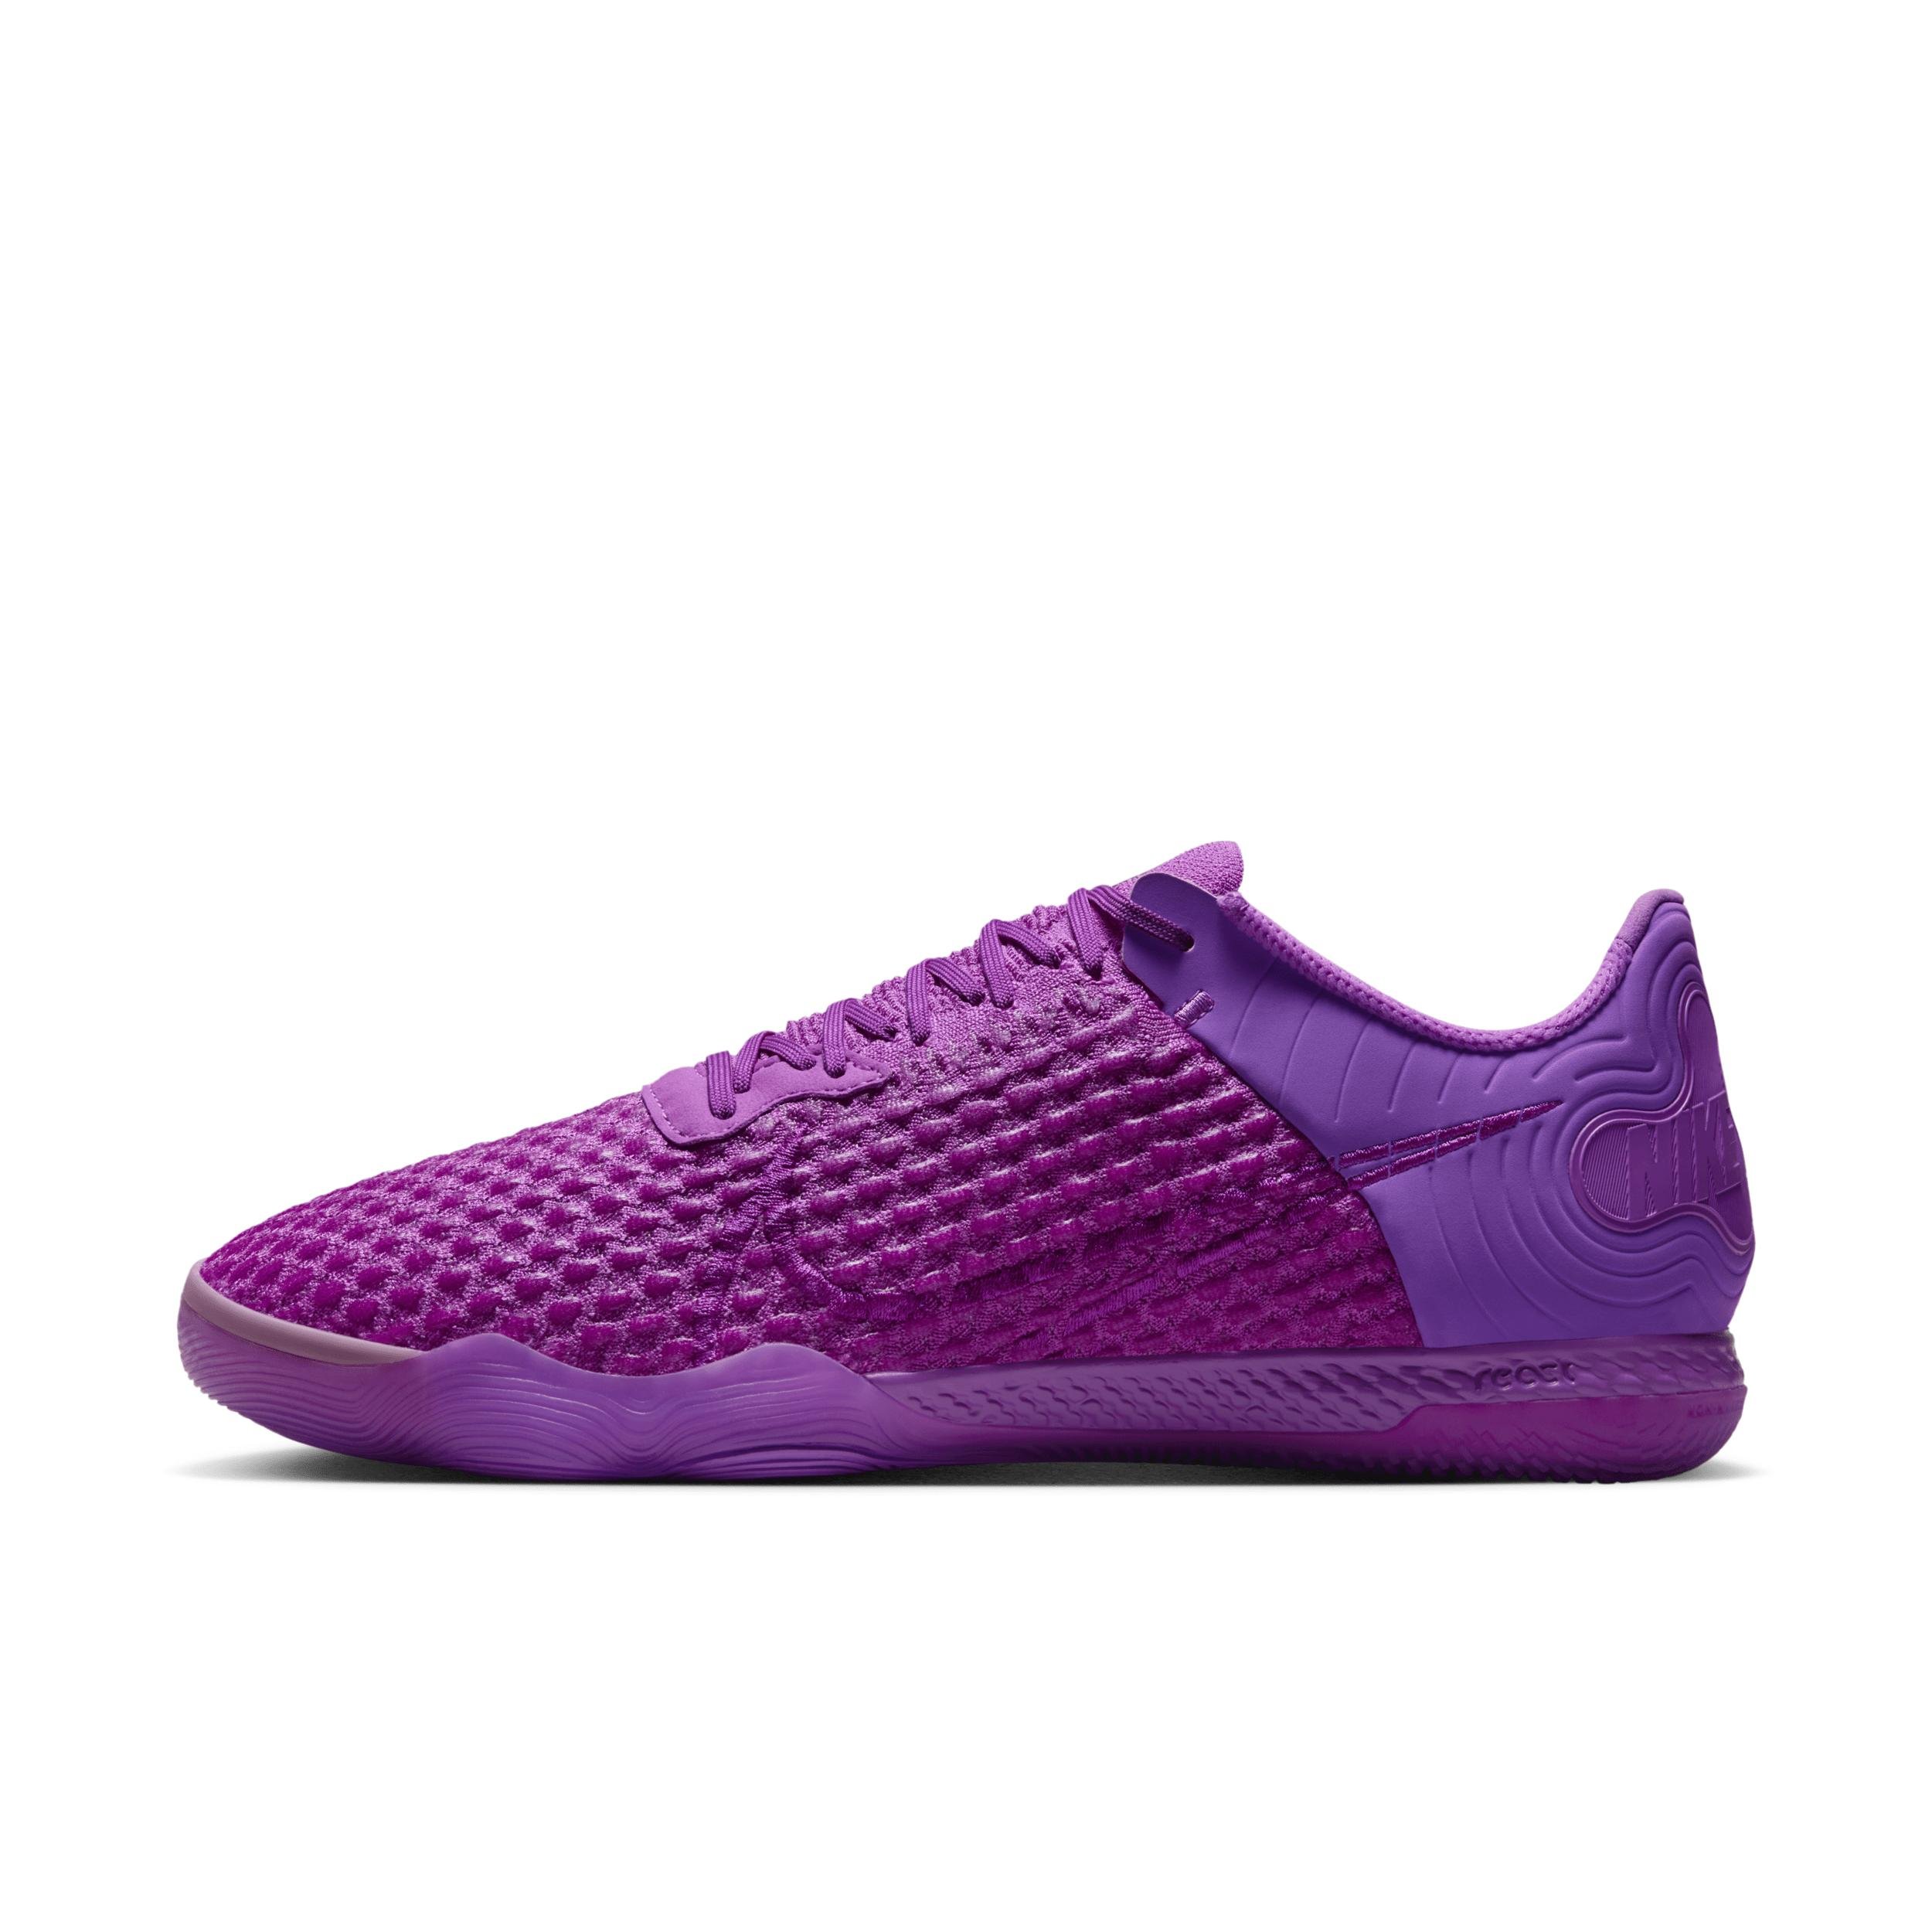 Nike Men's React Gato Indoor/Court Low-Top Soccer Shoes by NIKE